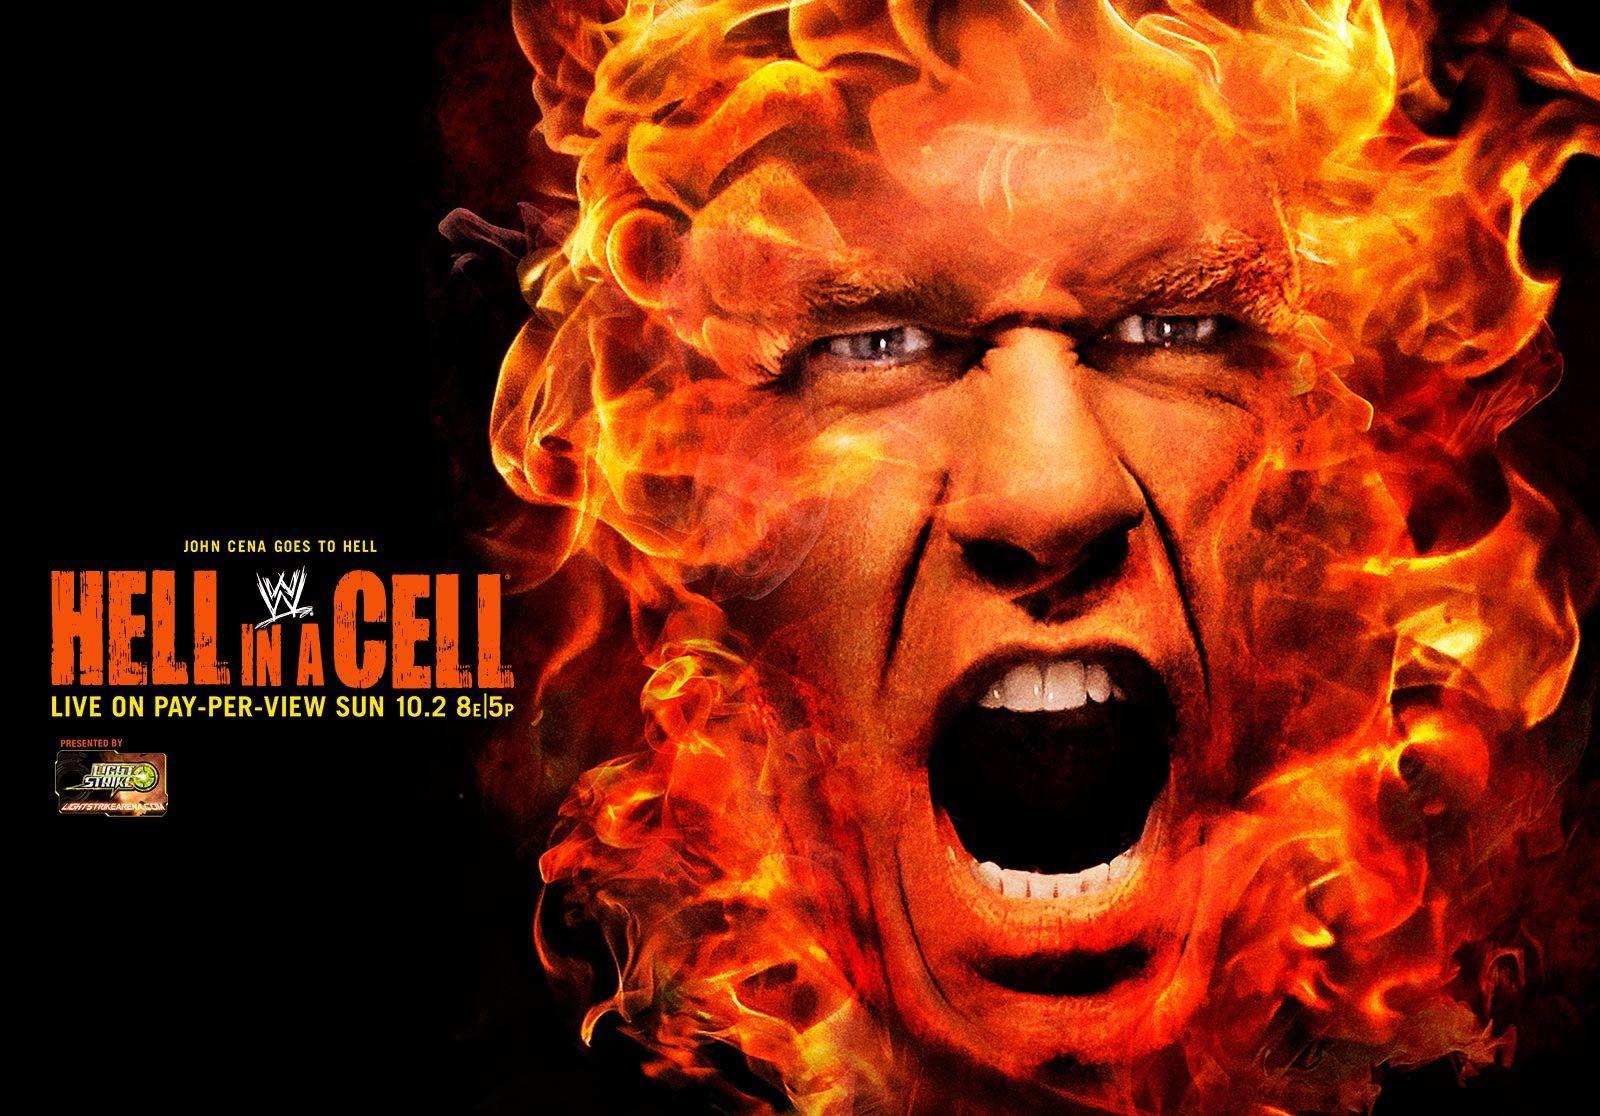 WWE Main Events image Hell In a Cell HD wallpaper and background